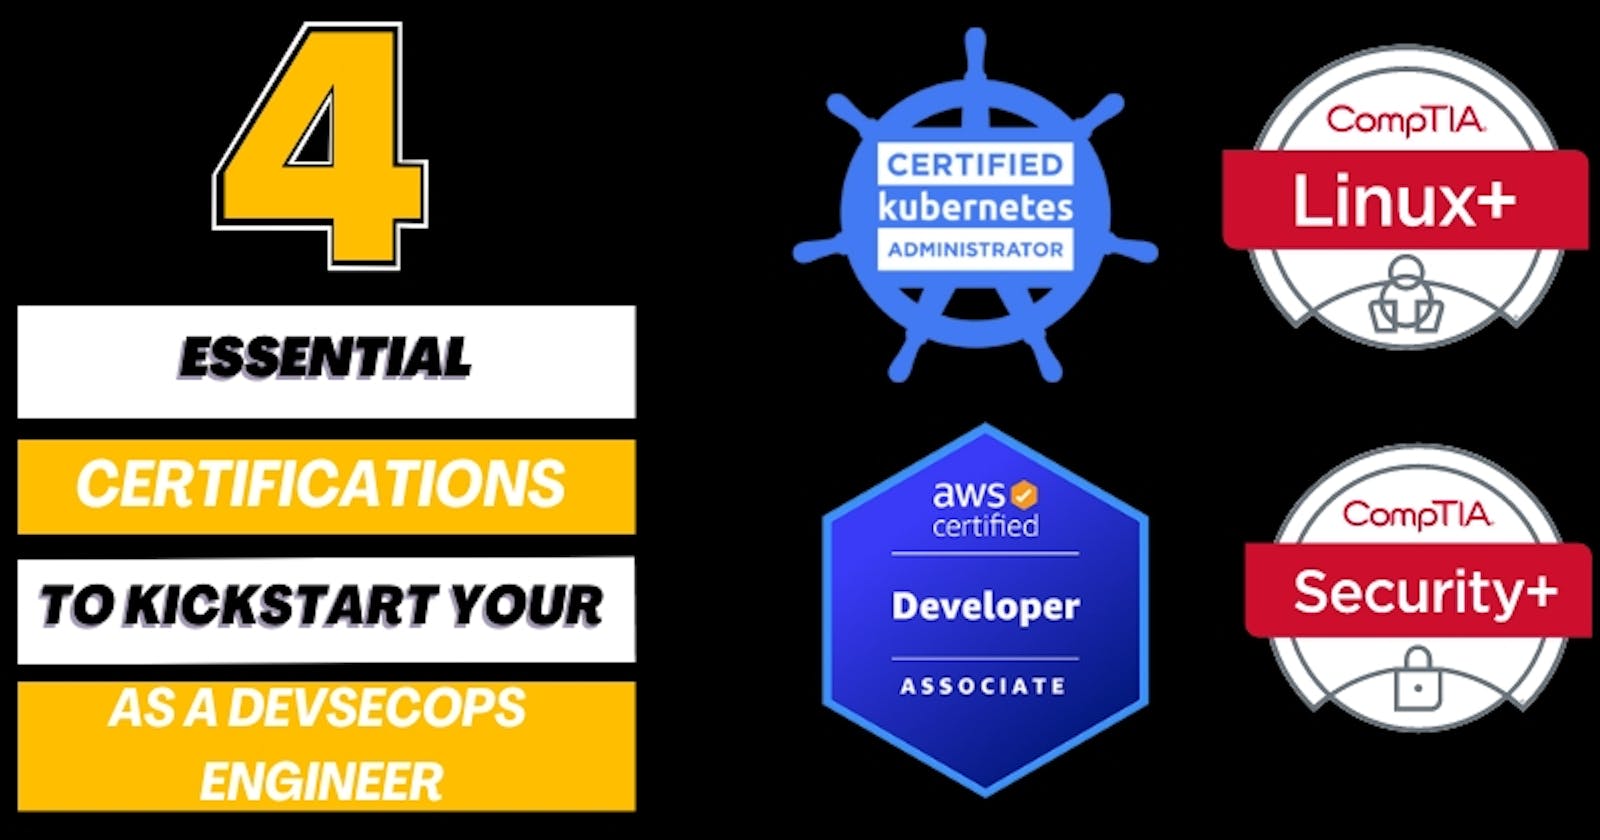 Kickstarting Your DevSecOps Career - The 4 Essential Certifications You Need